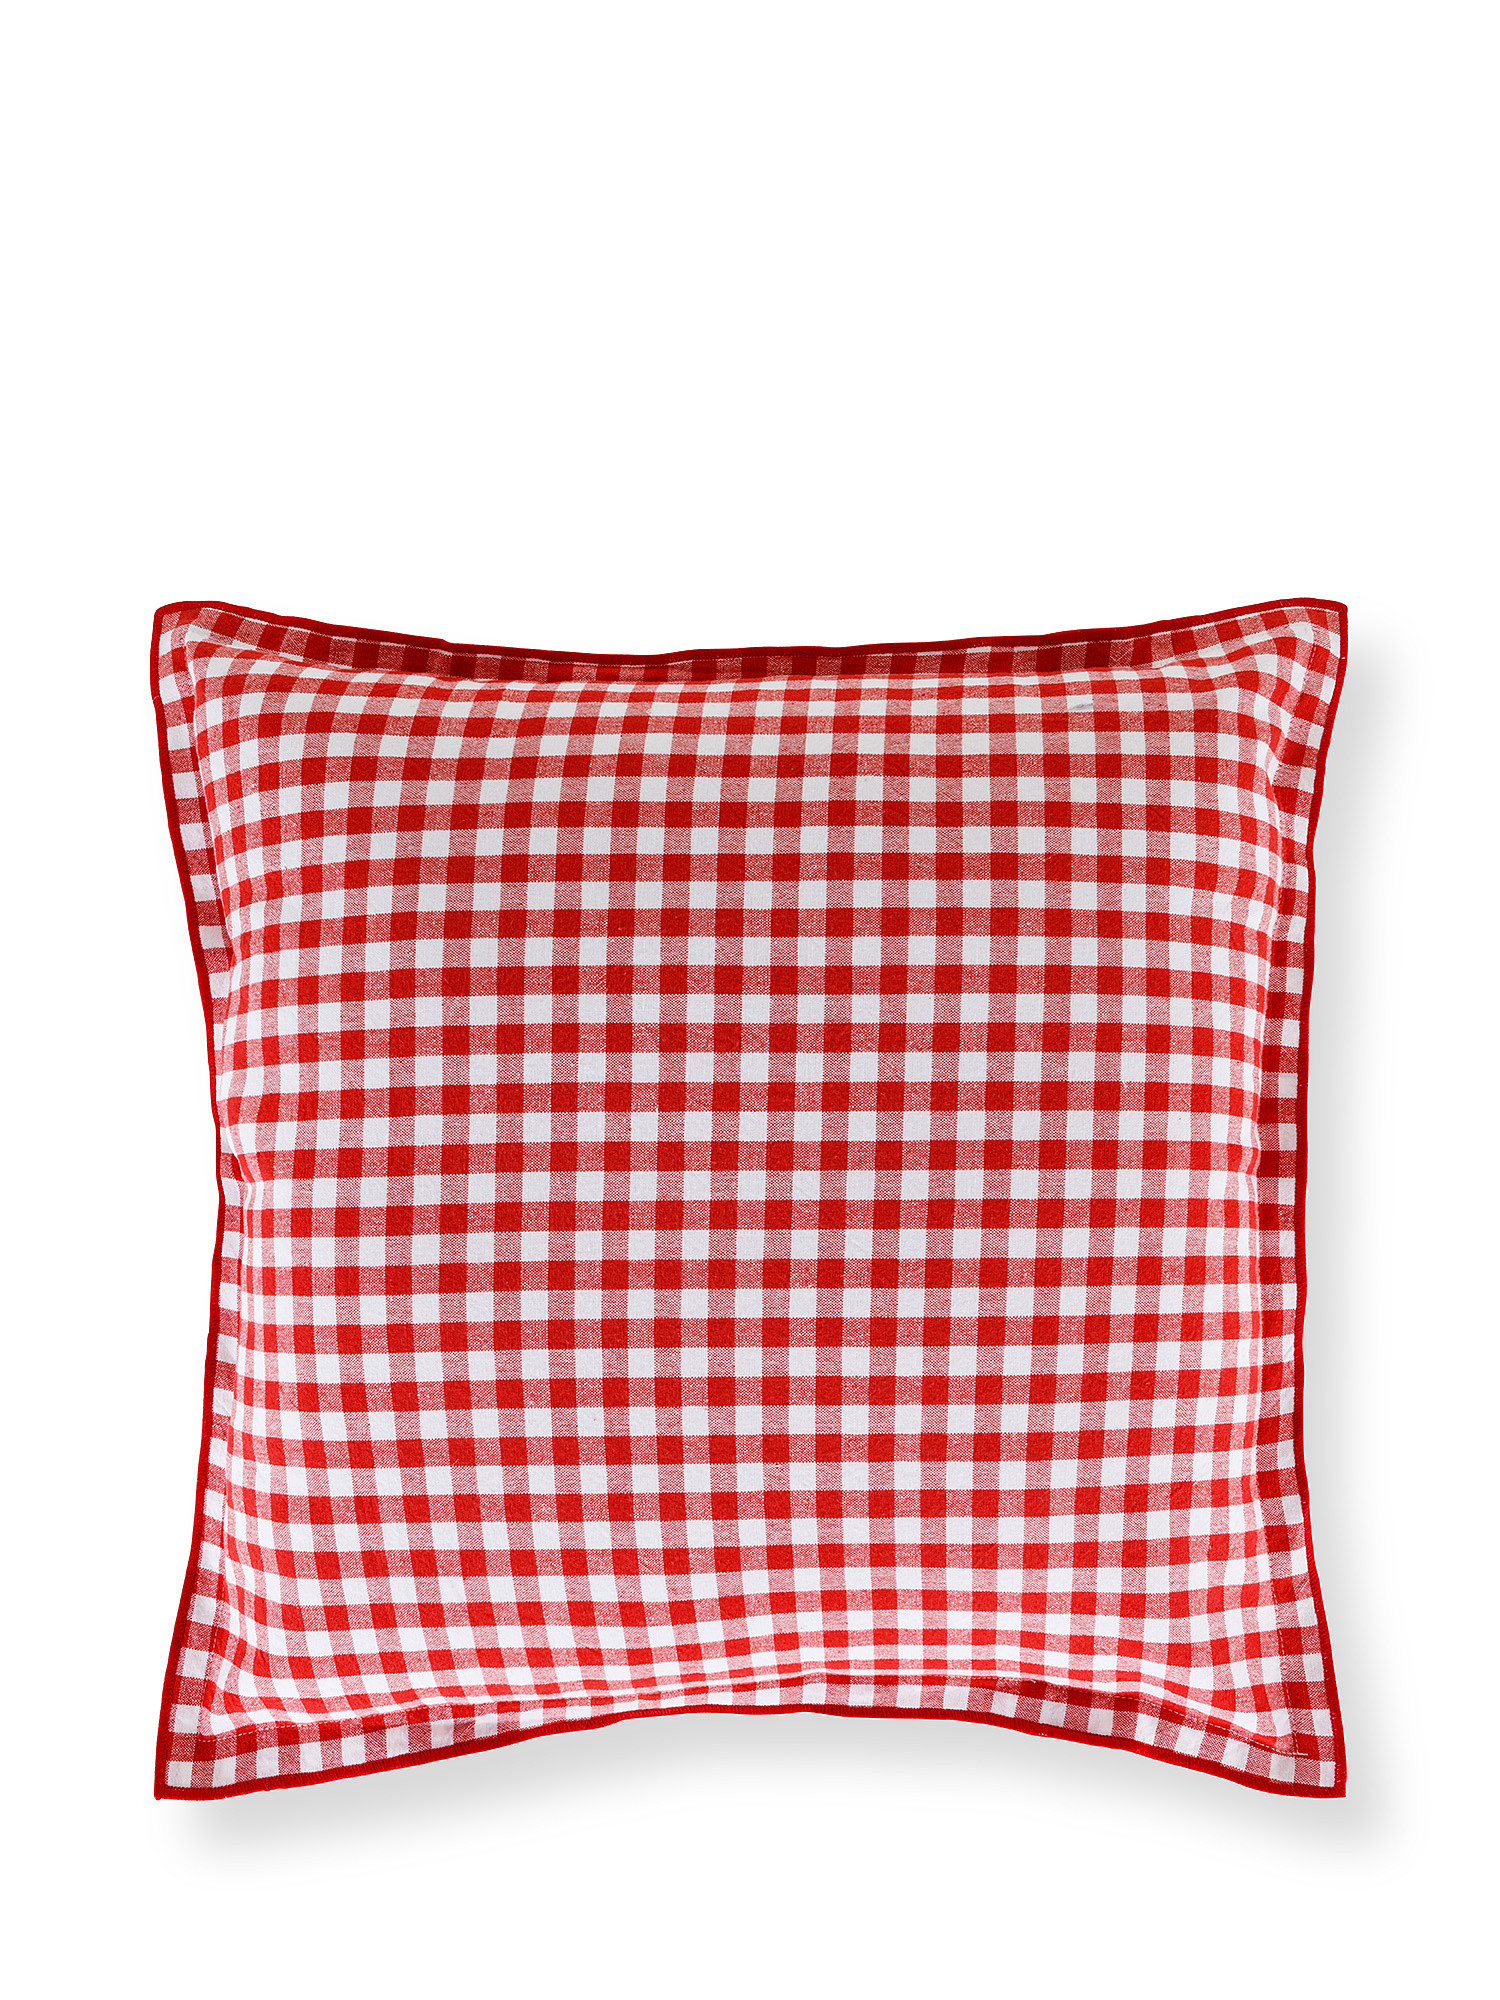 Cotton cushion with vichy motif 45x45cm, Red, large image number 0